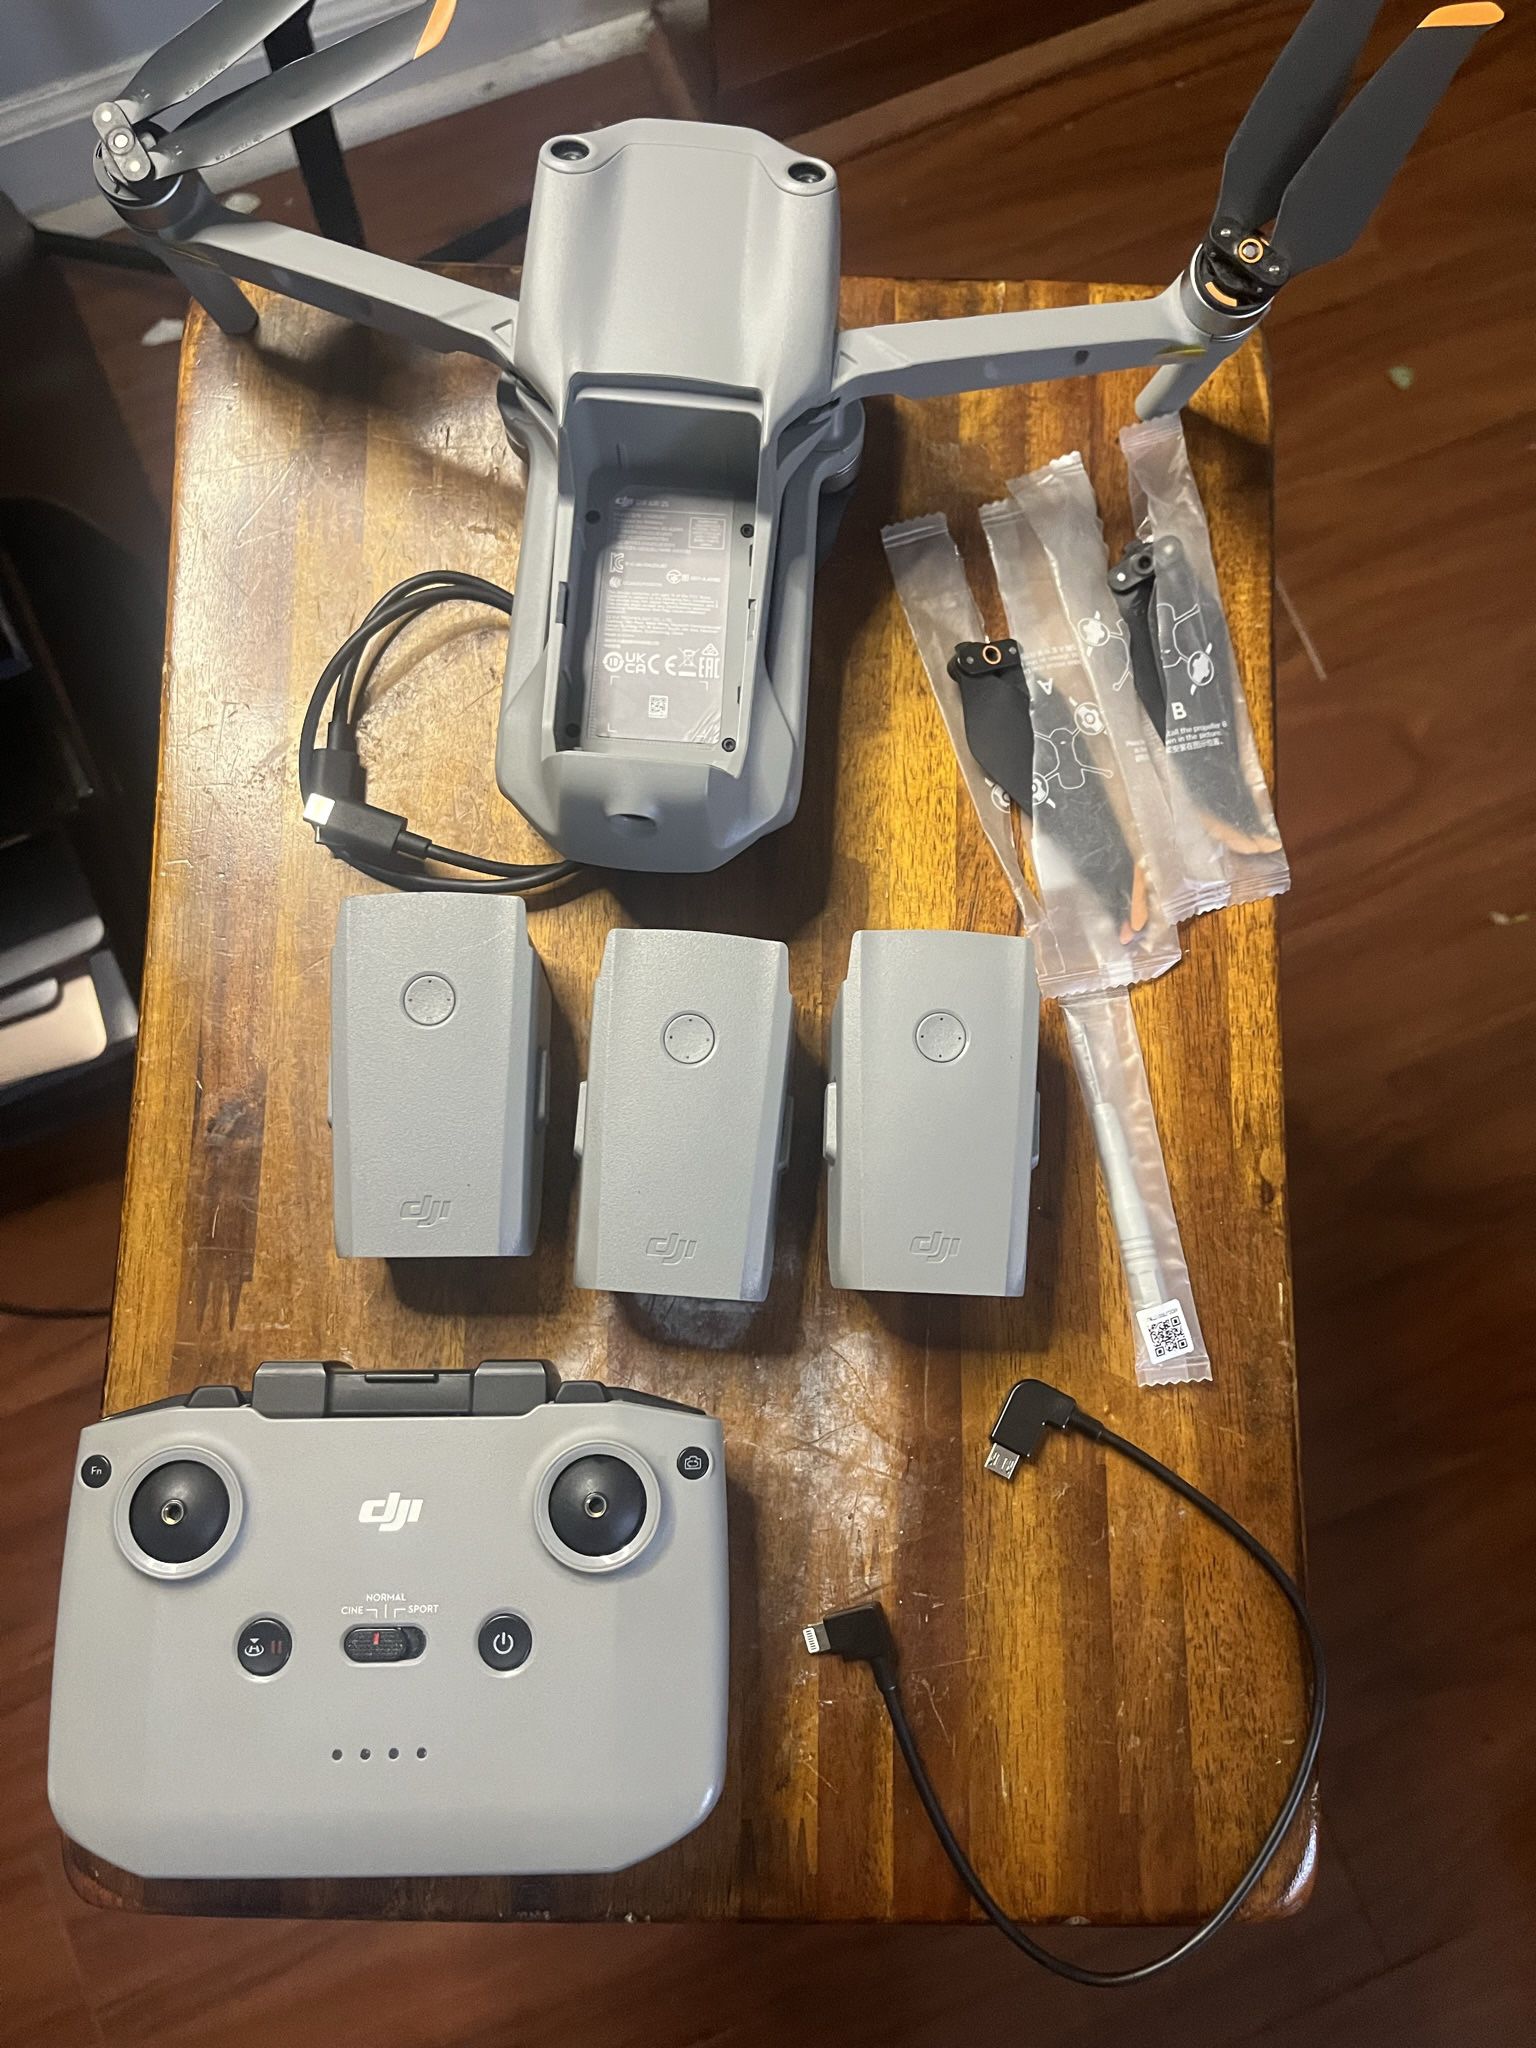 New DJI Air 2S Fly More Combo Drone with Remote Control 3 Separate Battery Adapters NEVER BEEN USED!